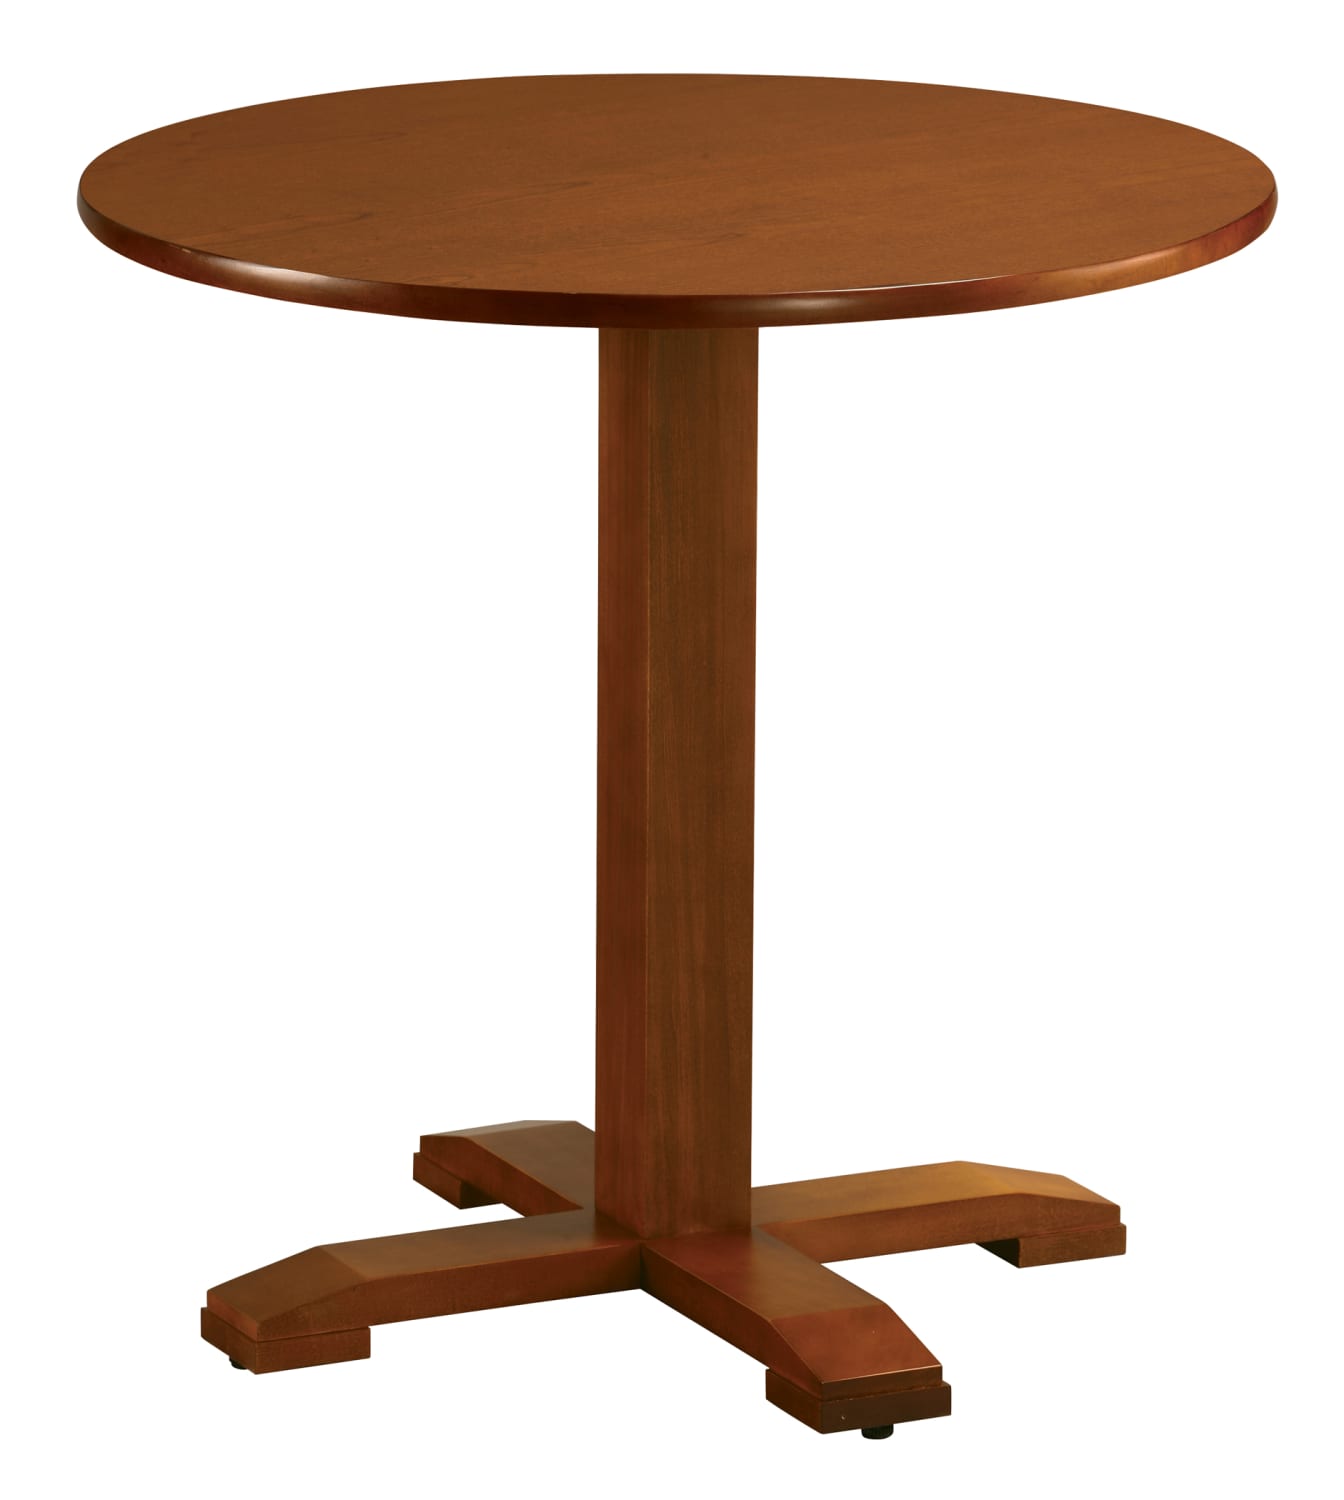 30" Round Dining Table